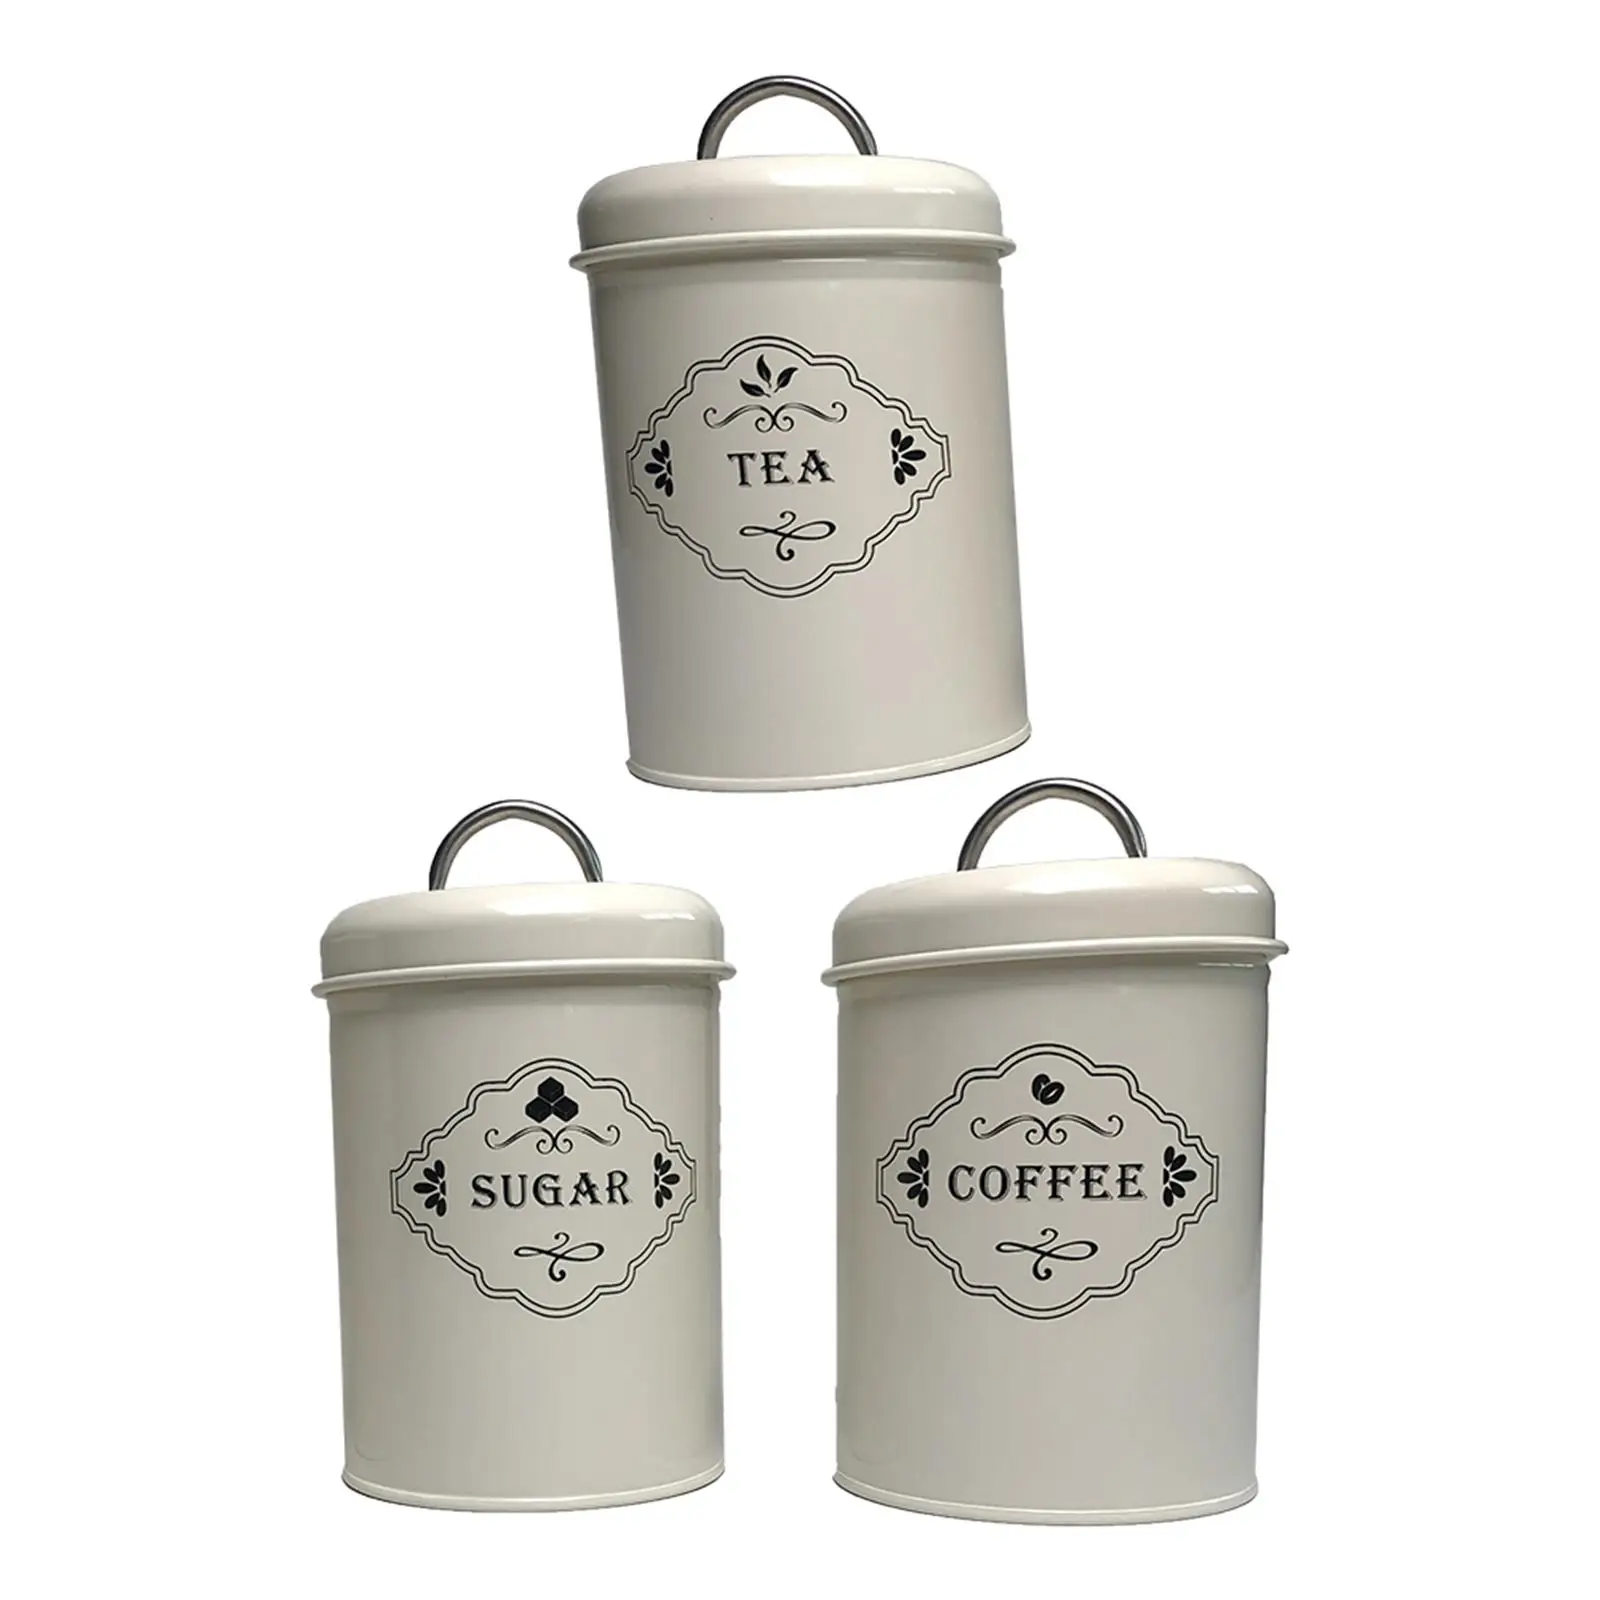 3pcs Tea Coffee Tin Canisters Kitchen Storage Pots Container